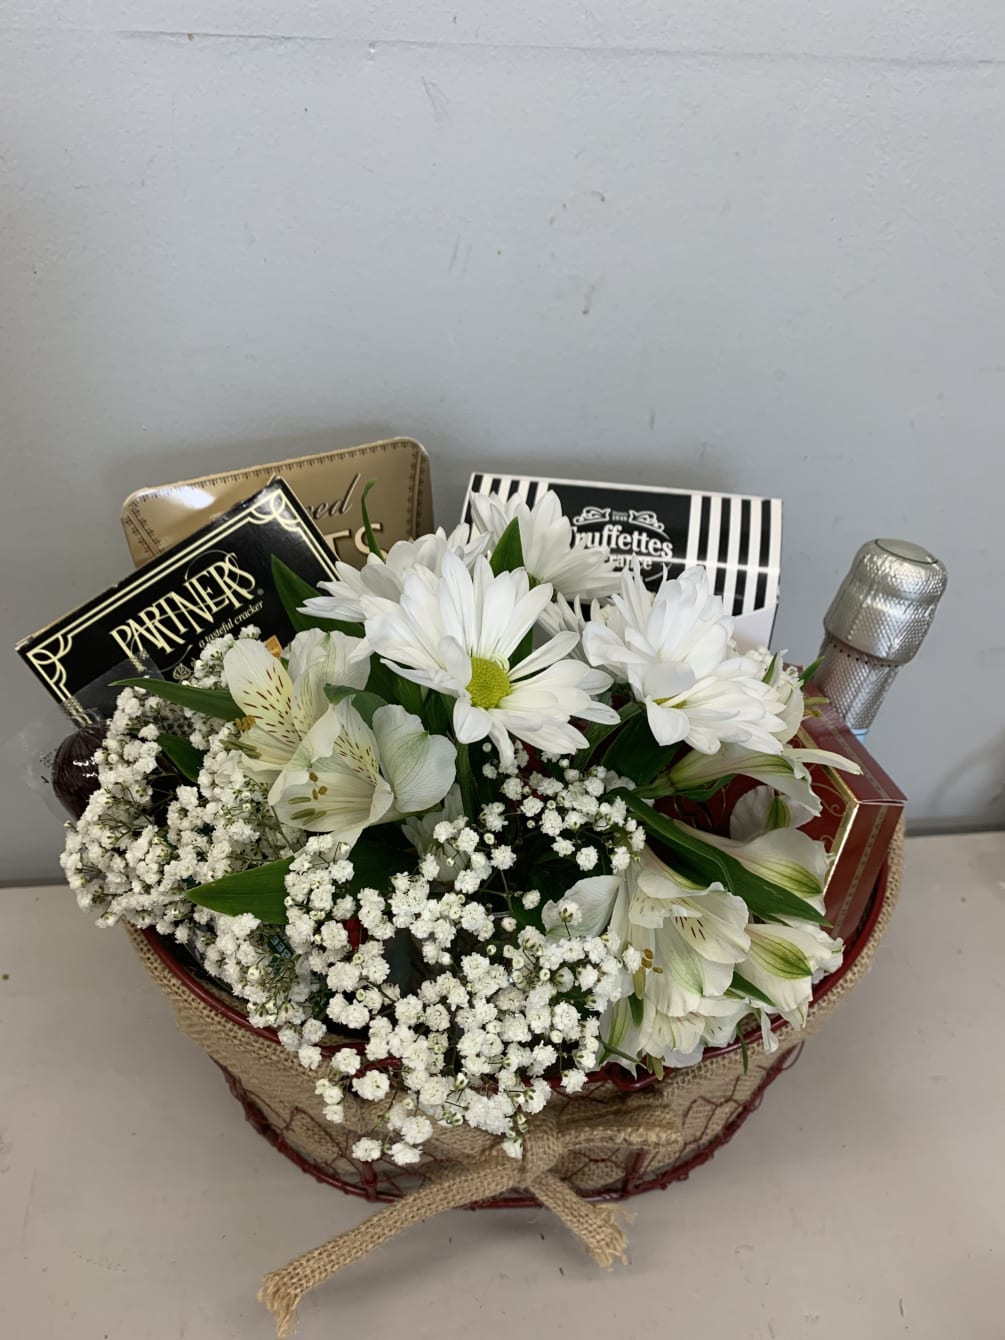 Red basket with goodies and flower arrangement 